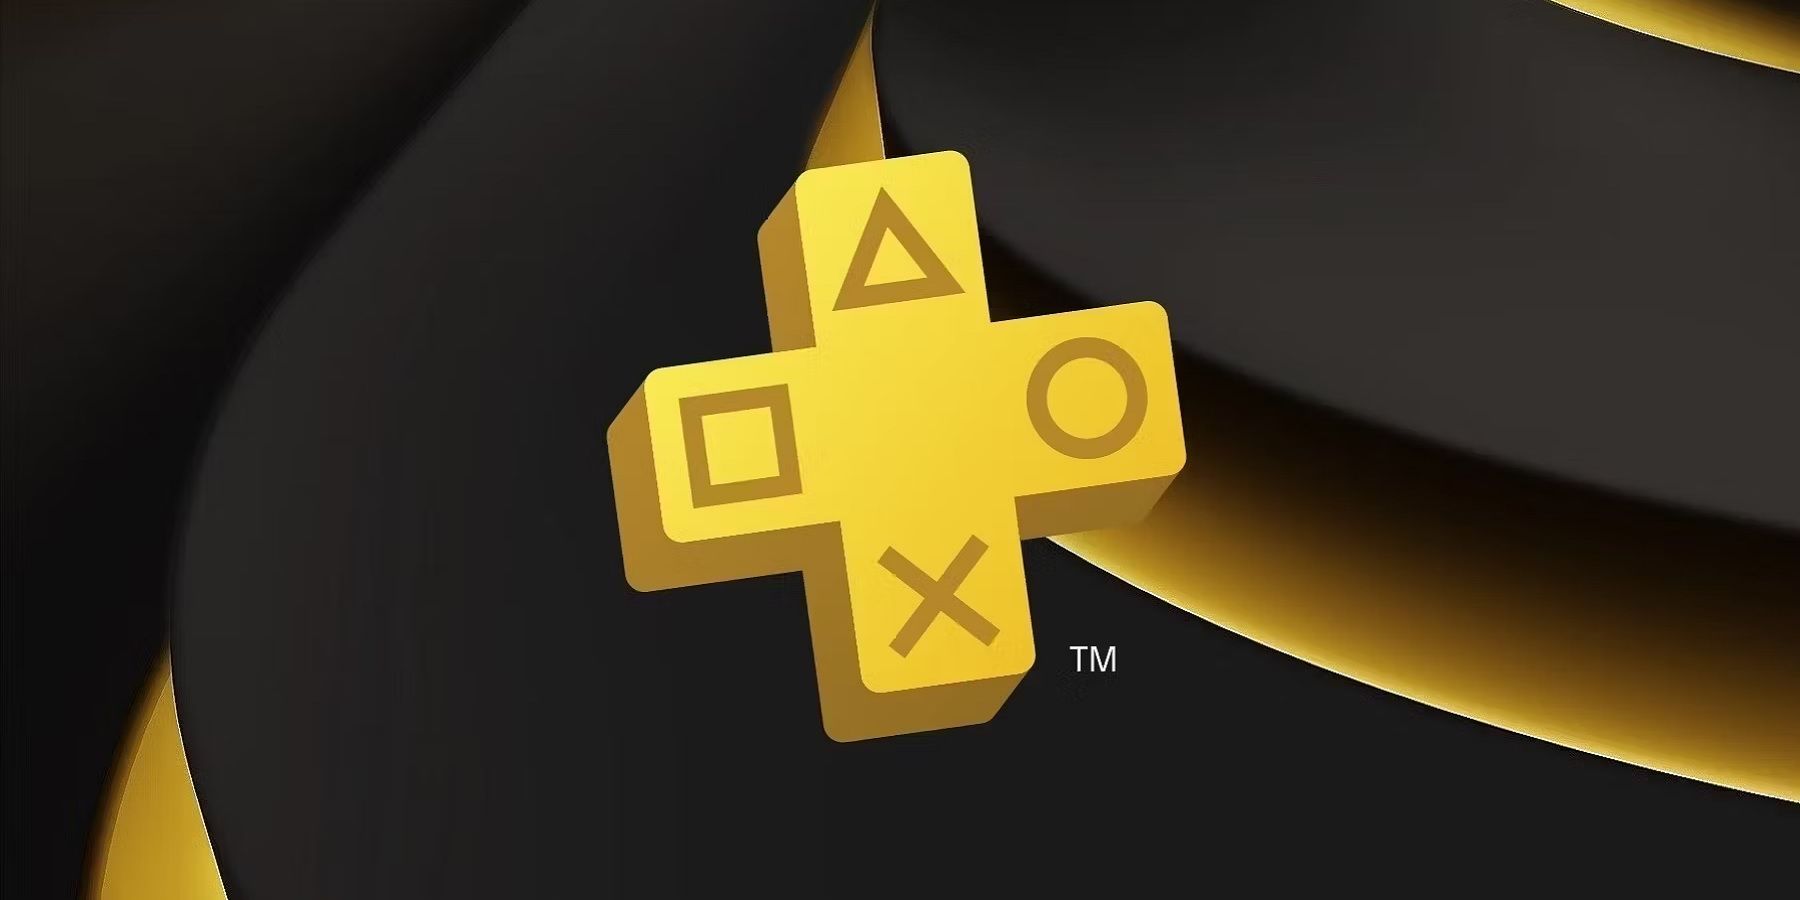 PlayStation Plus Extra - October 2023 (PS+) 